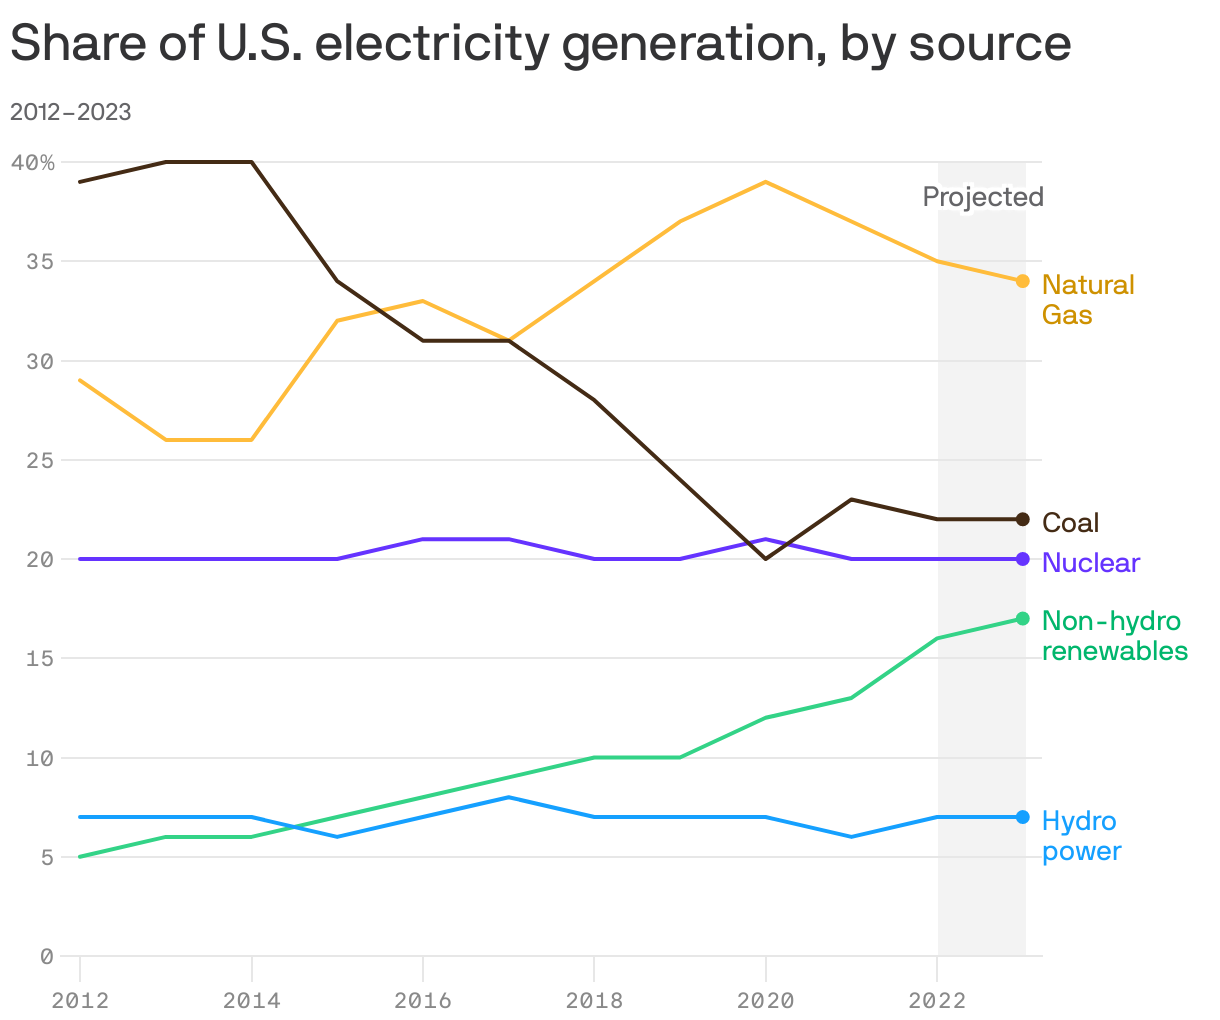 Share of U.S. electricity generation, by source